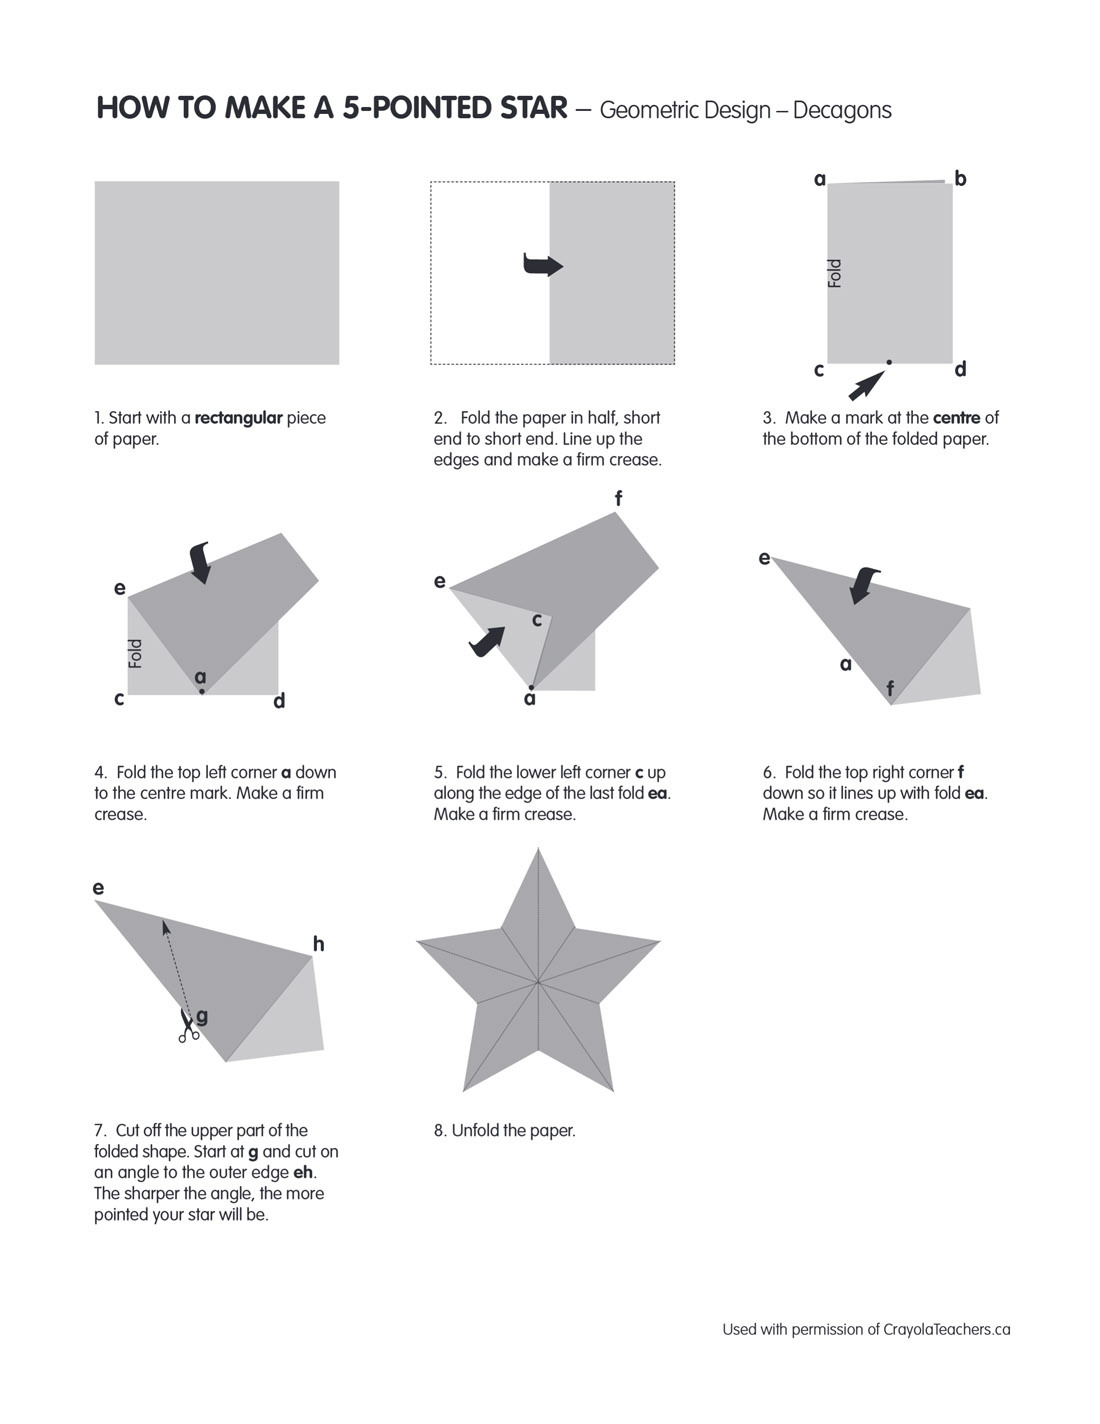 How to Make a 5-Sided Star